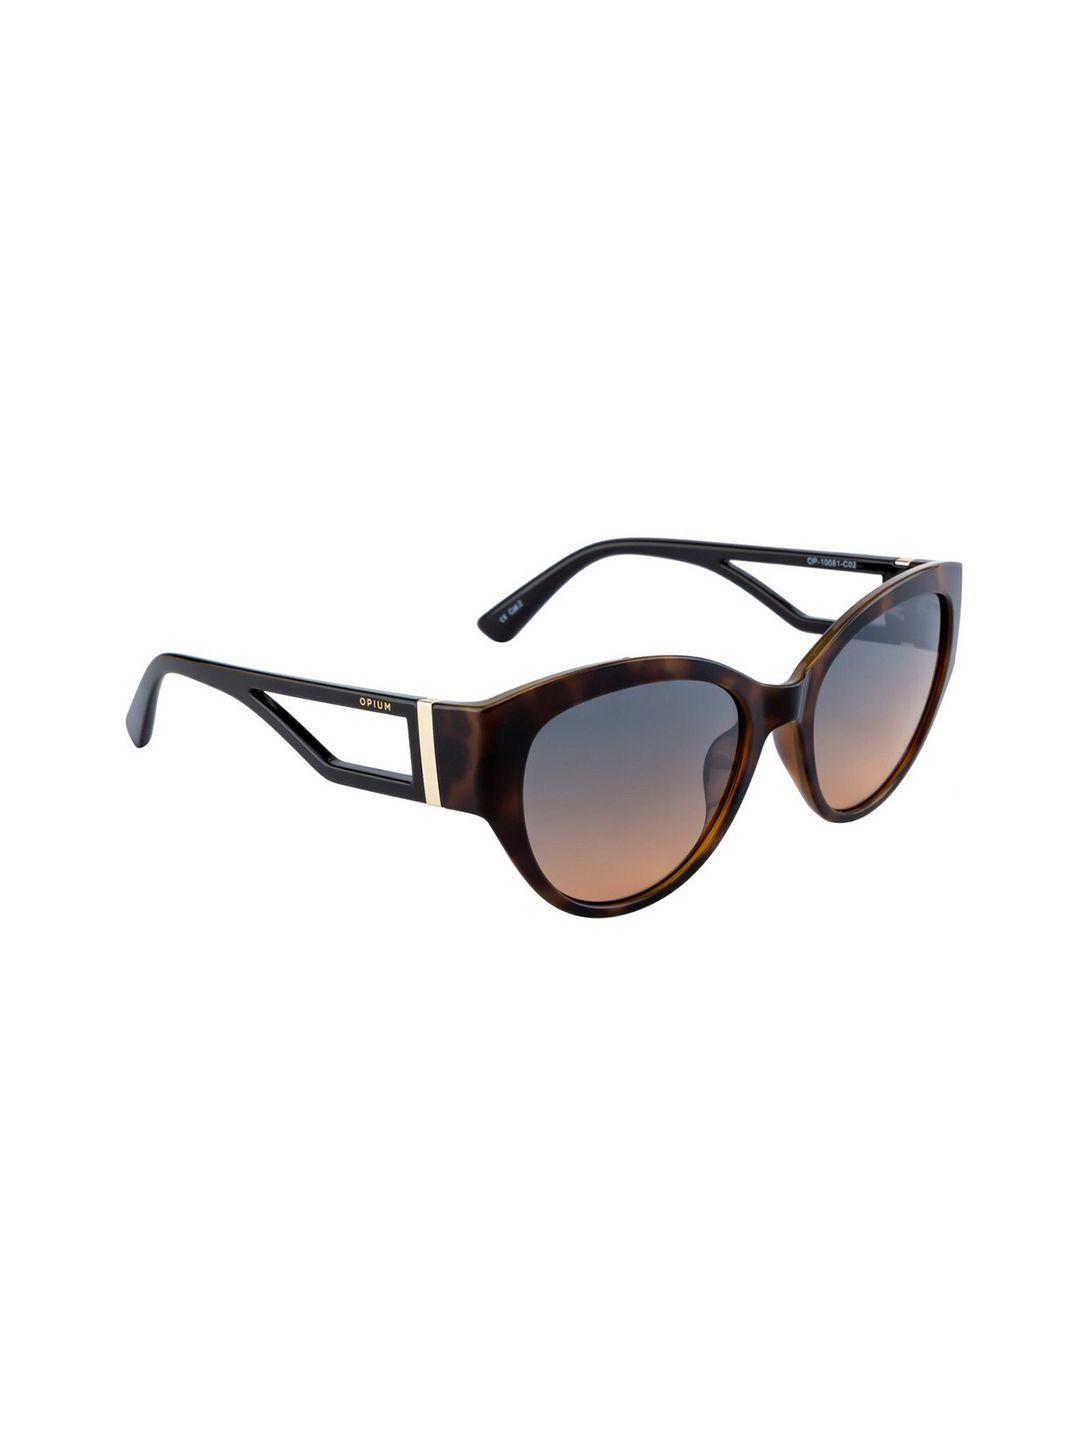 opium-women-blue-lens-&-brown-oval-sunglasses-with-uv-protected-lens-op-10081-c02